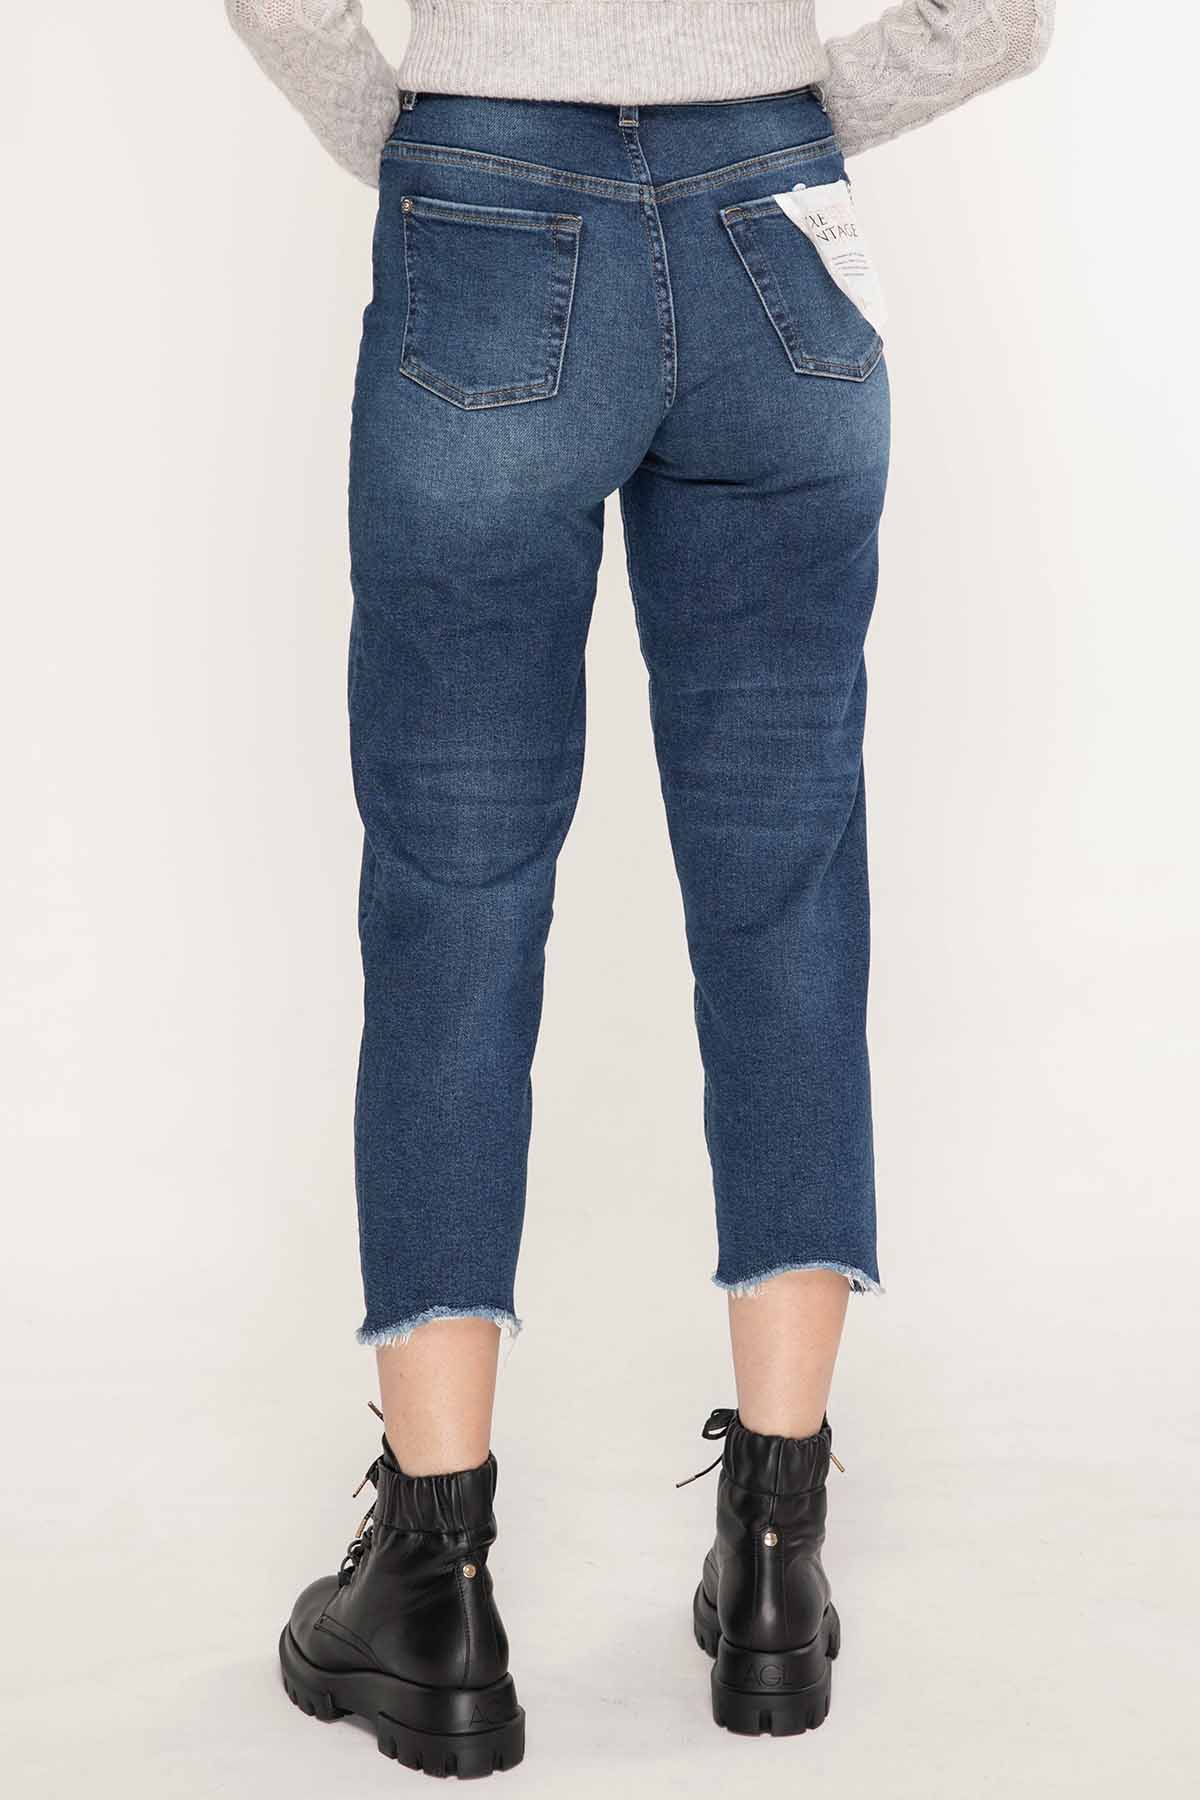 7 For All Mankind Luxe Vintage Jeans-Libas Trendy Fashion Store